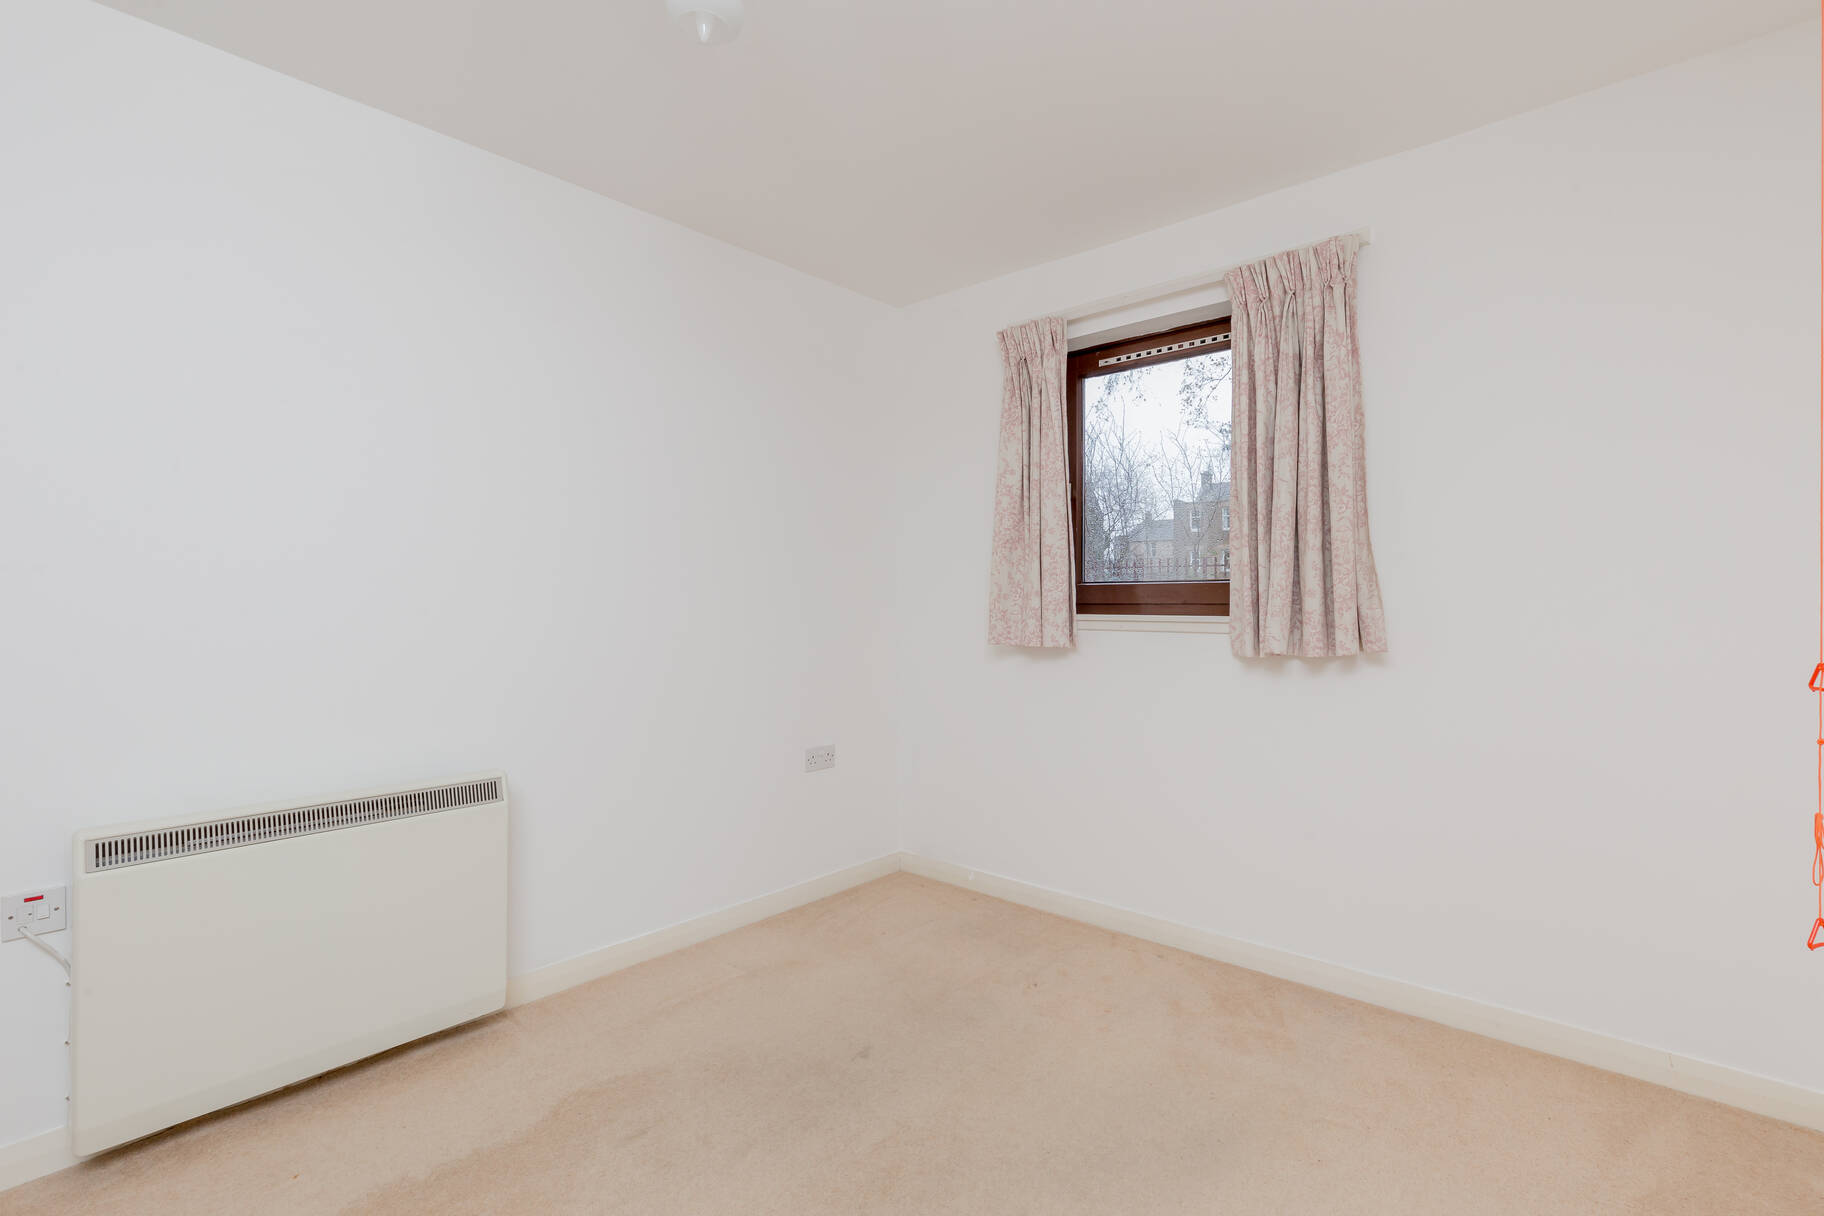 Flat 106 Carlyle Court, 173 Comely Bank Road, EH4 1DH